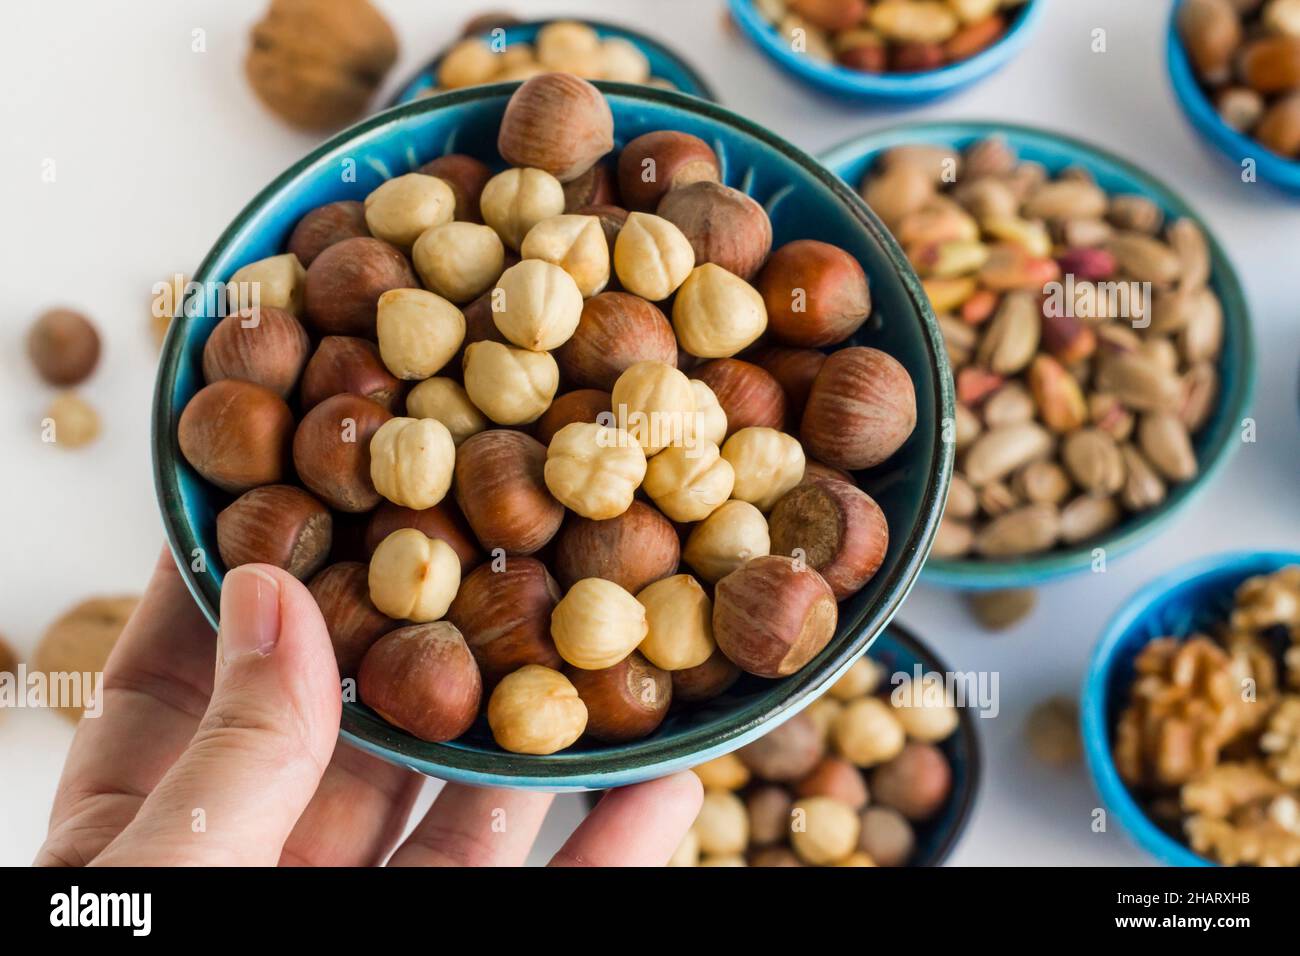 Hand holding a blue ceramic bowl full of nuts aganist other bowls,close up taken Stock Photo